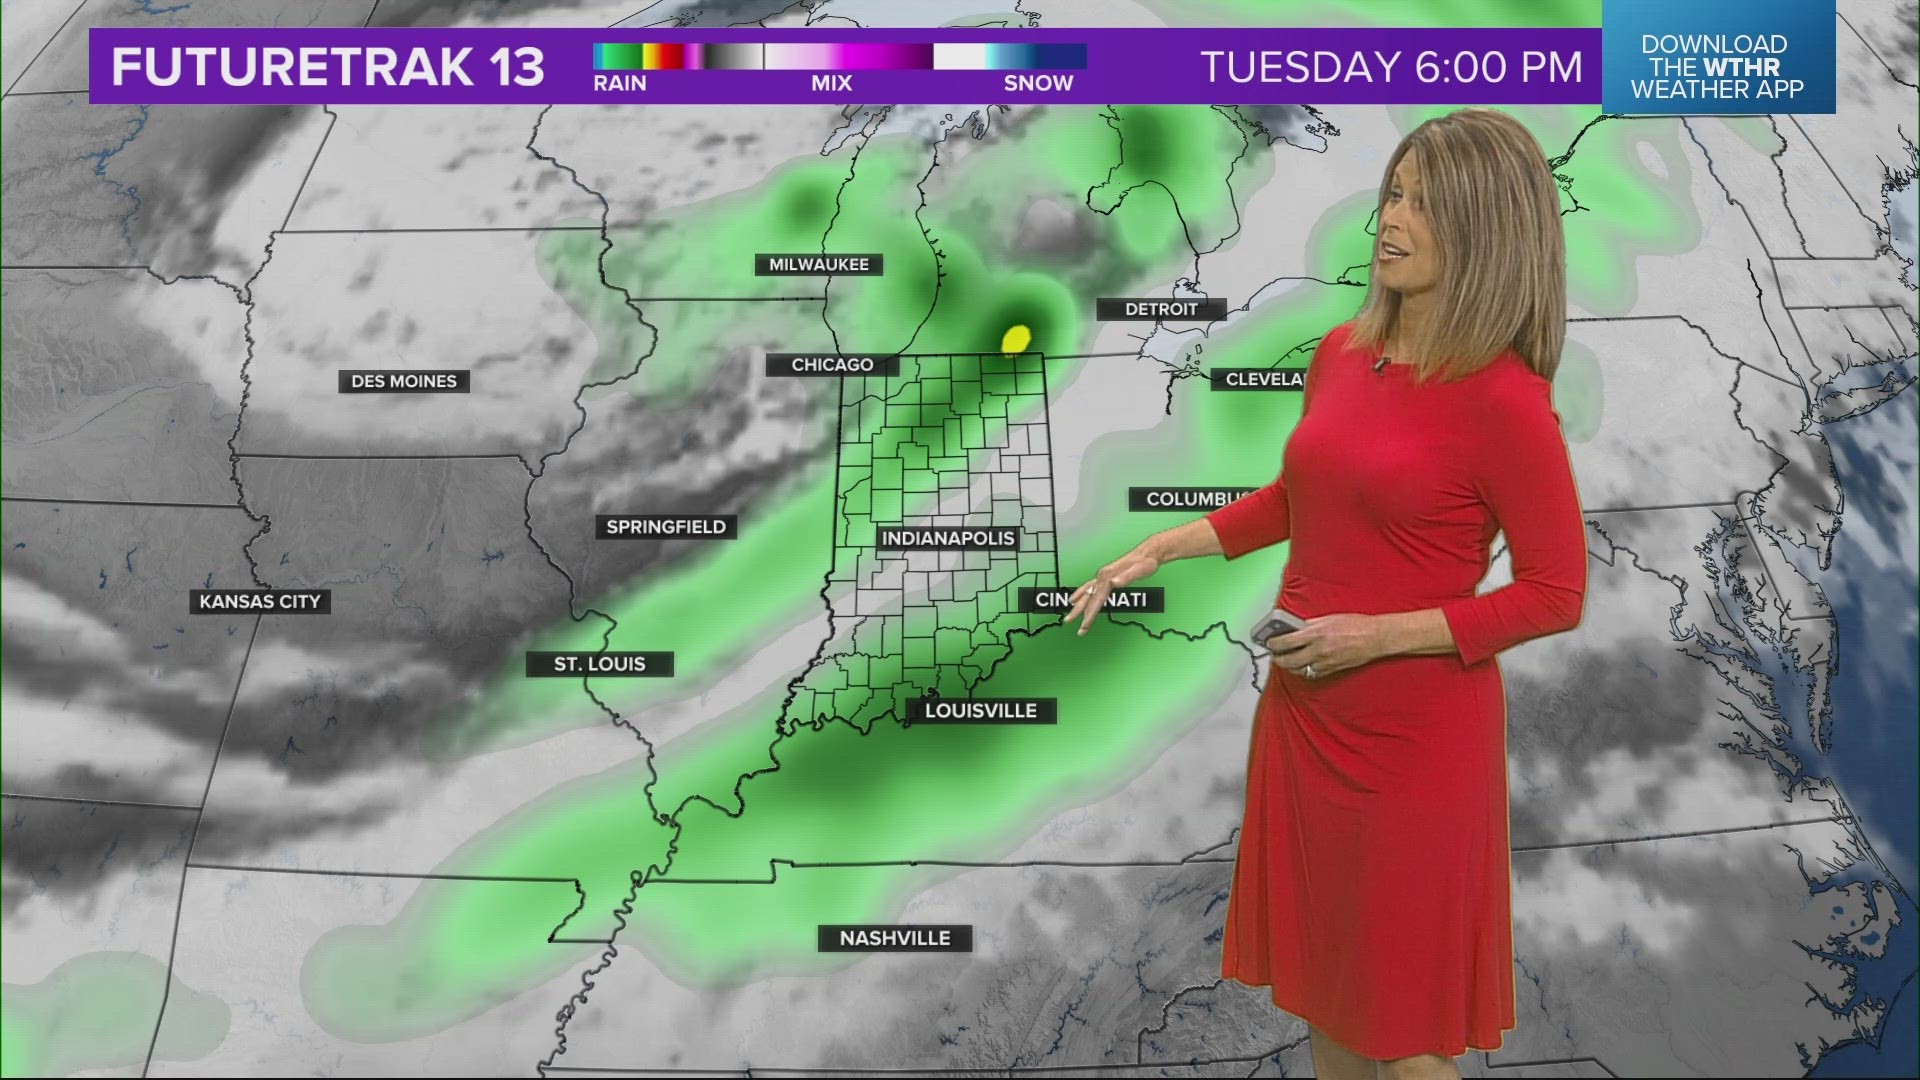 13News meteorologist Angela Buchman details a mild day in central Indiana and what the weekend forecast could look like.